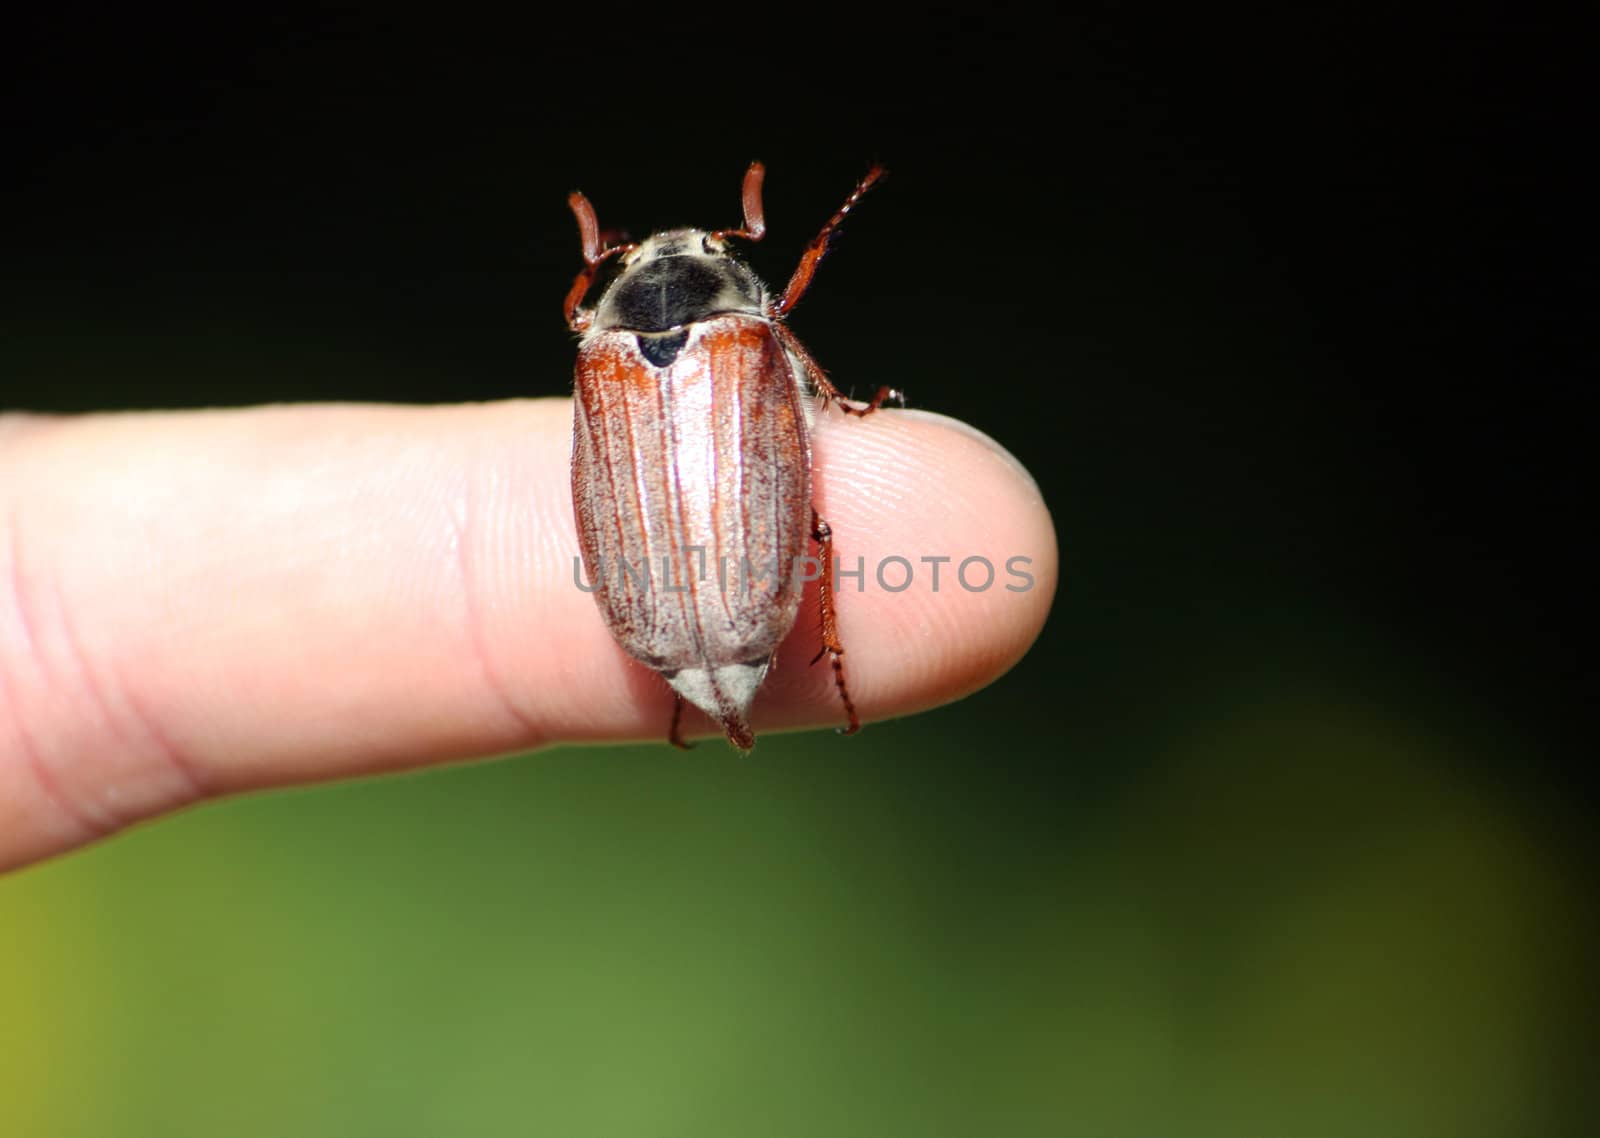 a beetle sitting on a finger on a background greenery